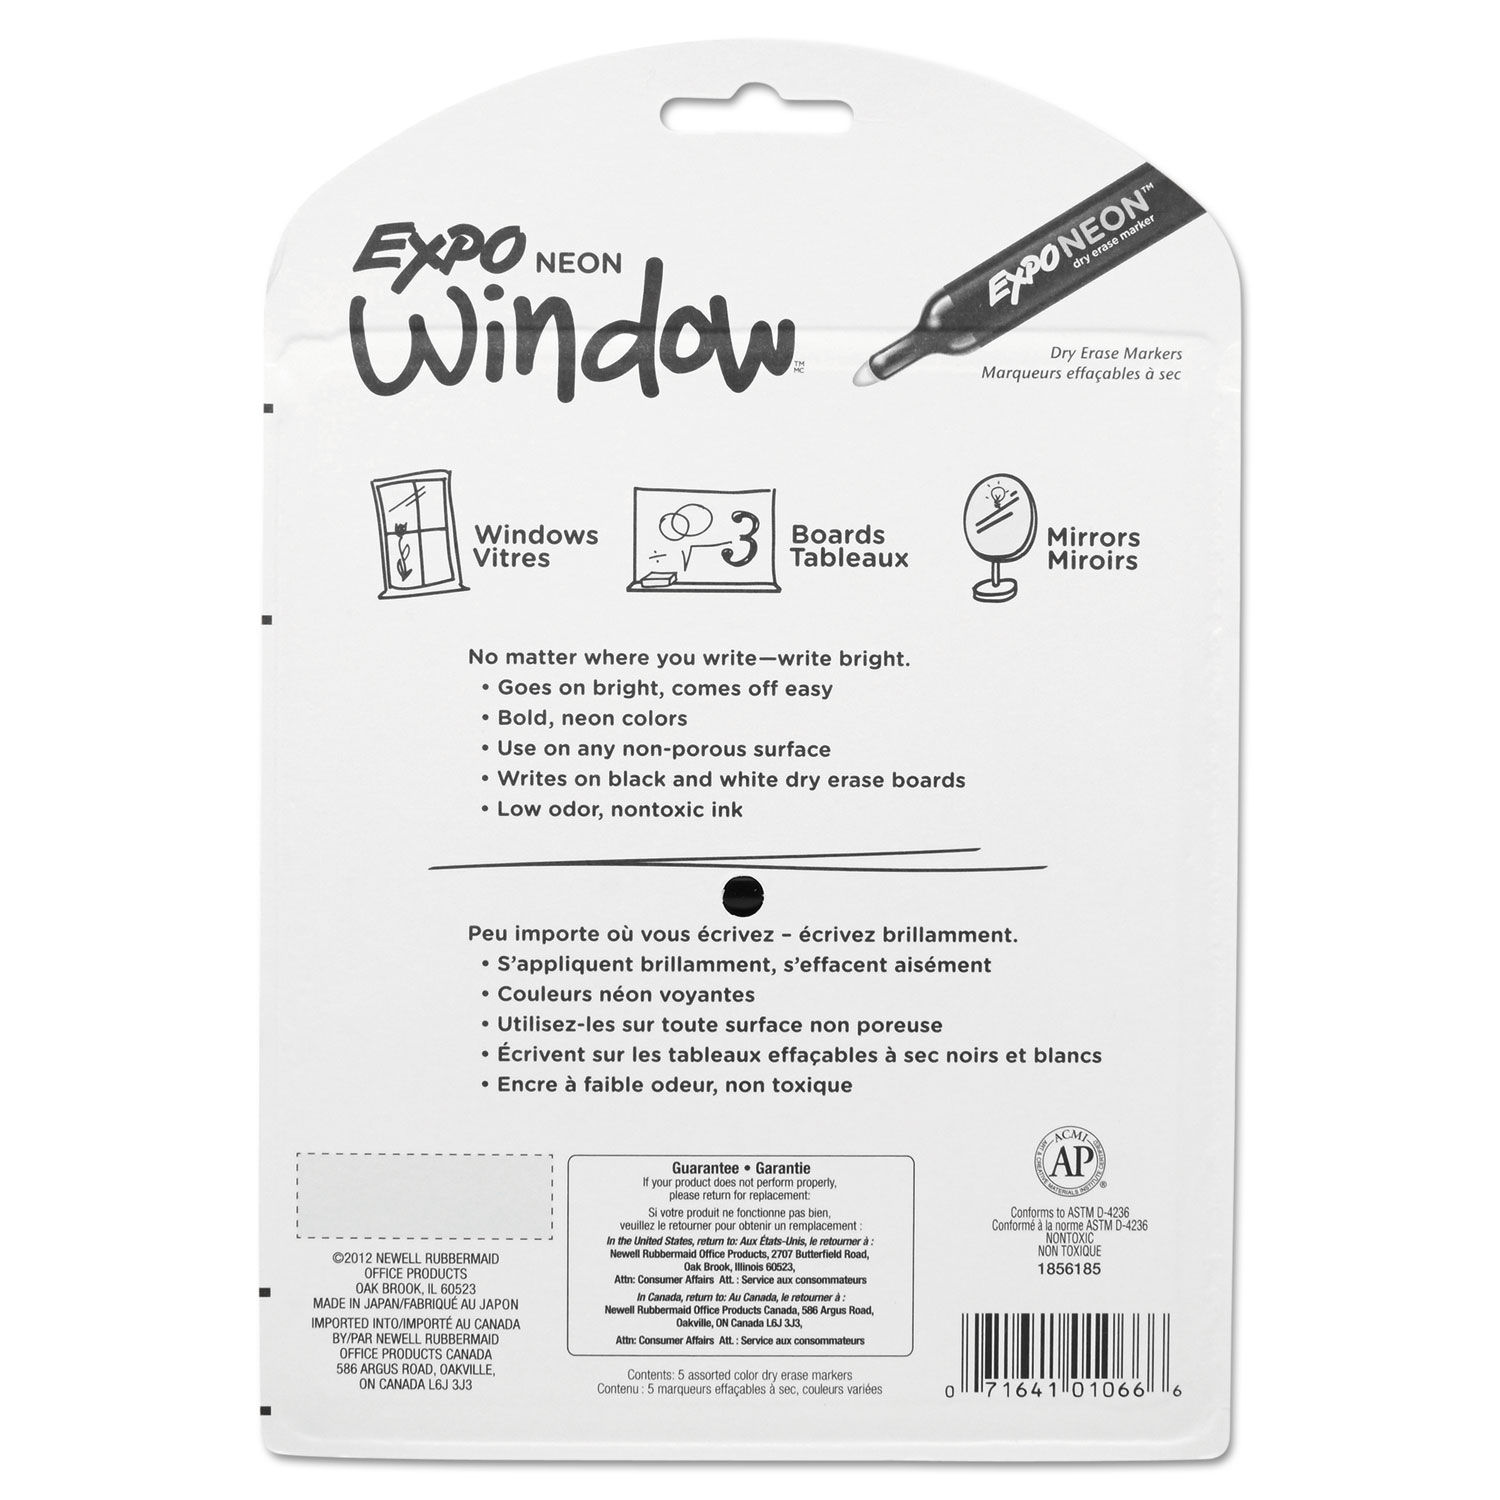 Neon Windows Dry Erase Marker by EXPO® SAN1752226